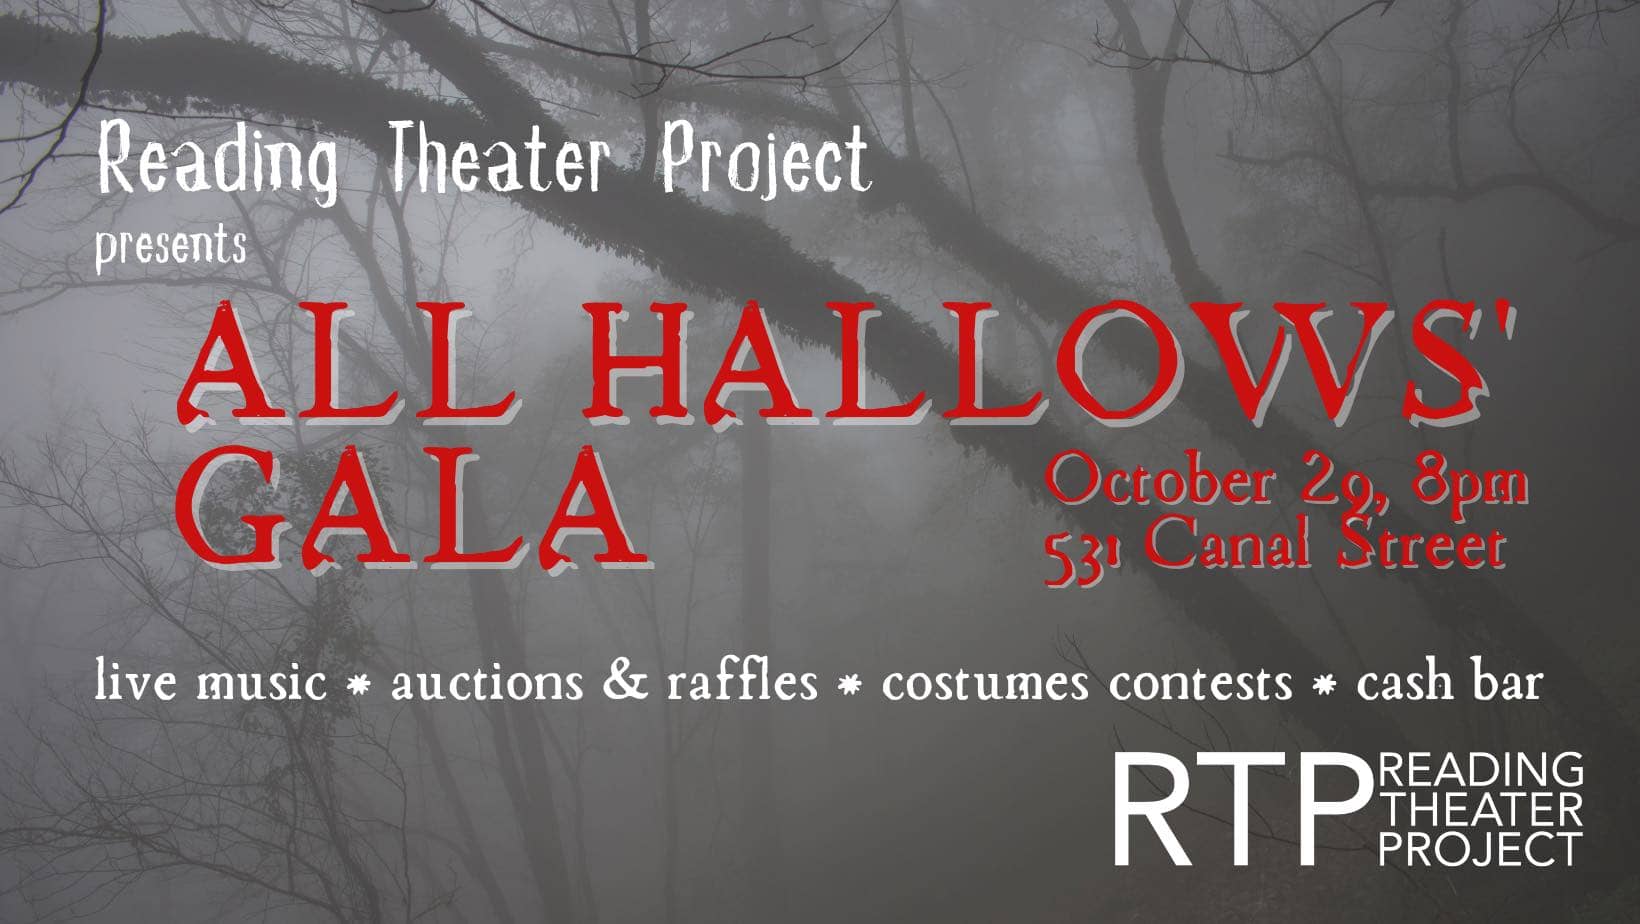 All Hallows’ Gala – Join us 10/29!